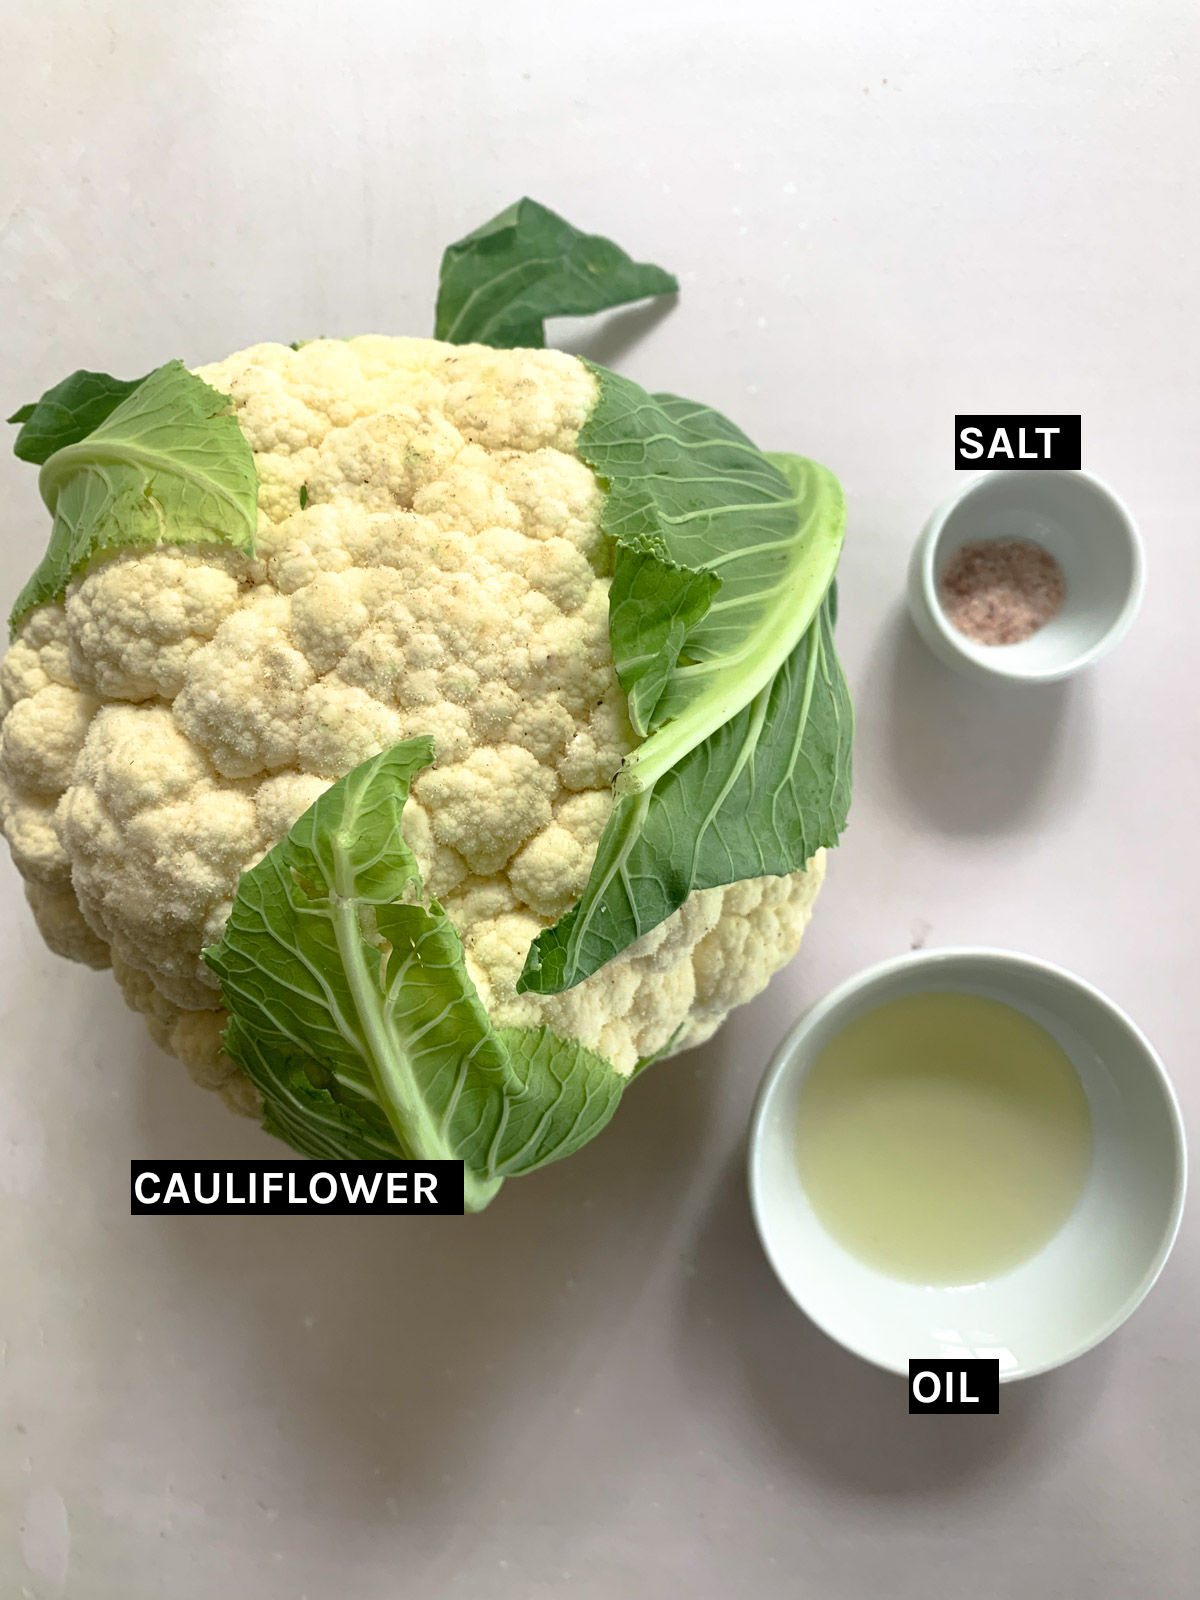 a head of cauliflower, separate white bowls of salt and oil